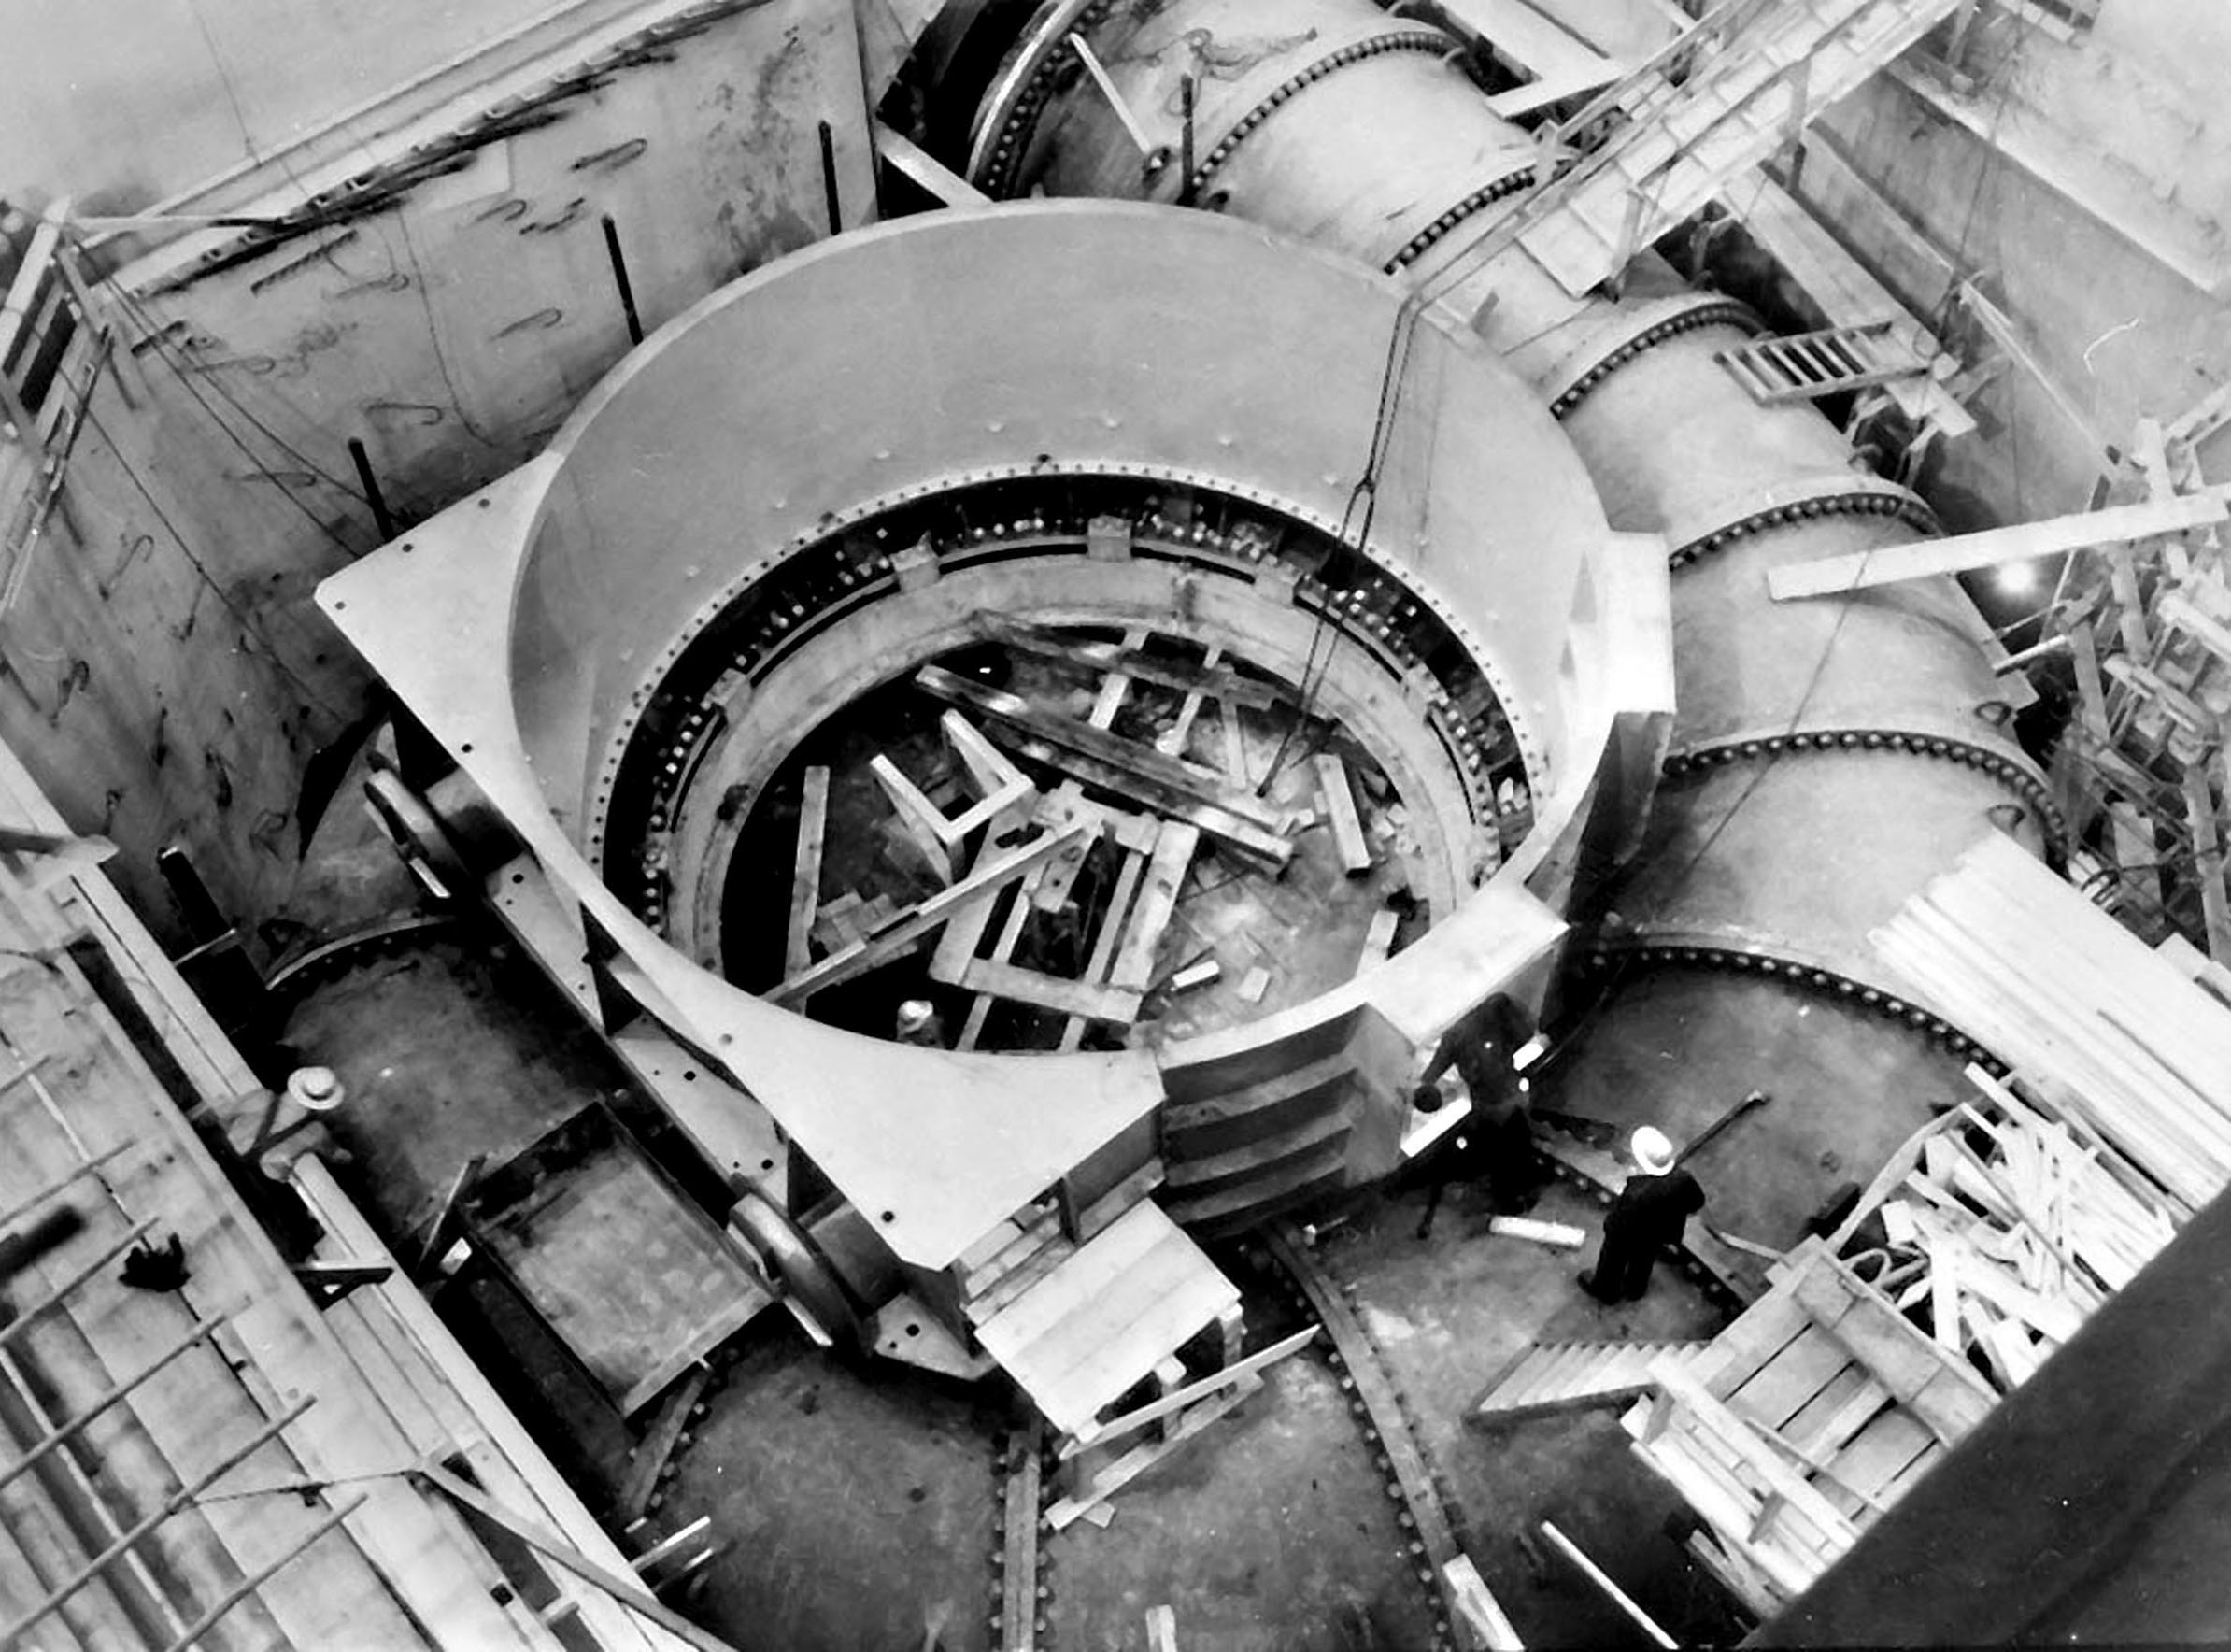 December 4, 1947. Scrollcase ready for concrete in L-9 turbine pit at the west powerhouse of Grand Coulee Dam.